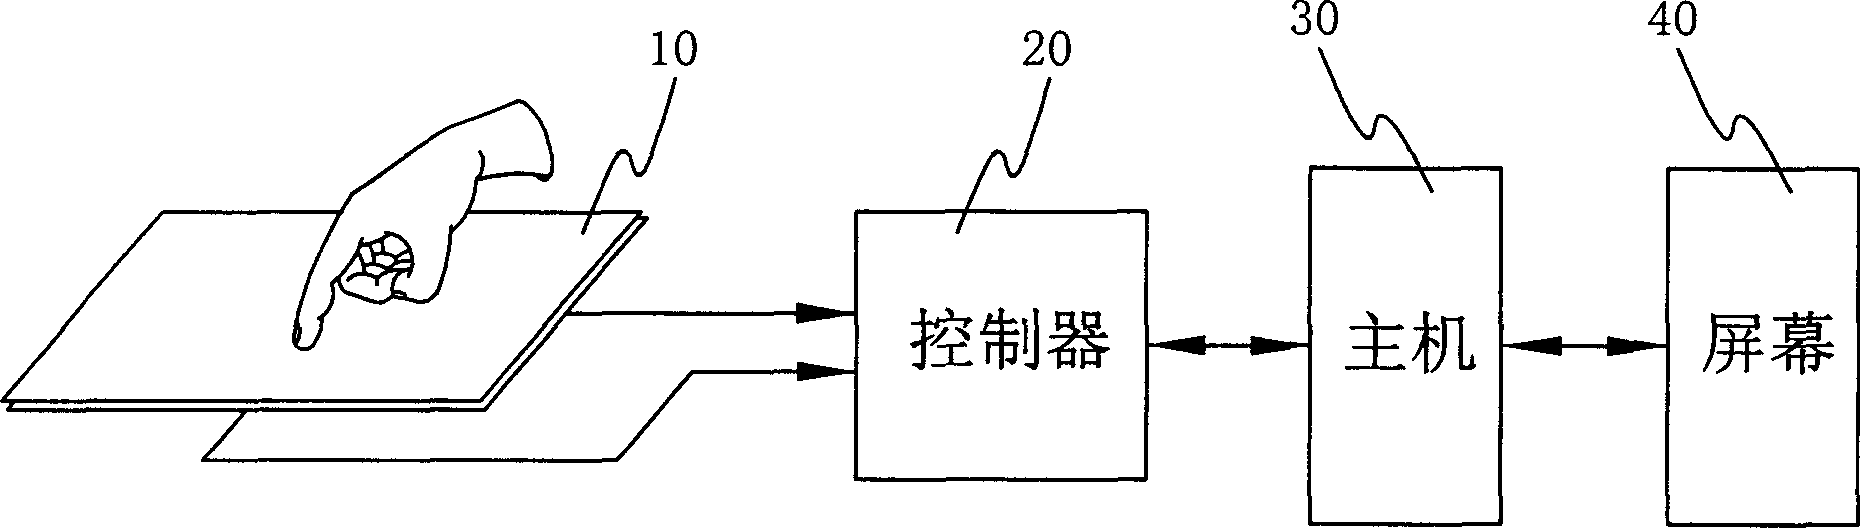 Method for identifying single clicking action and controller